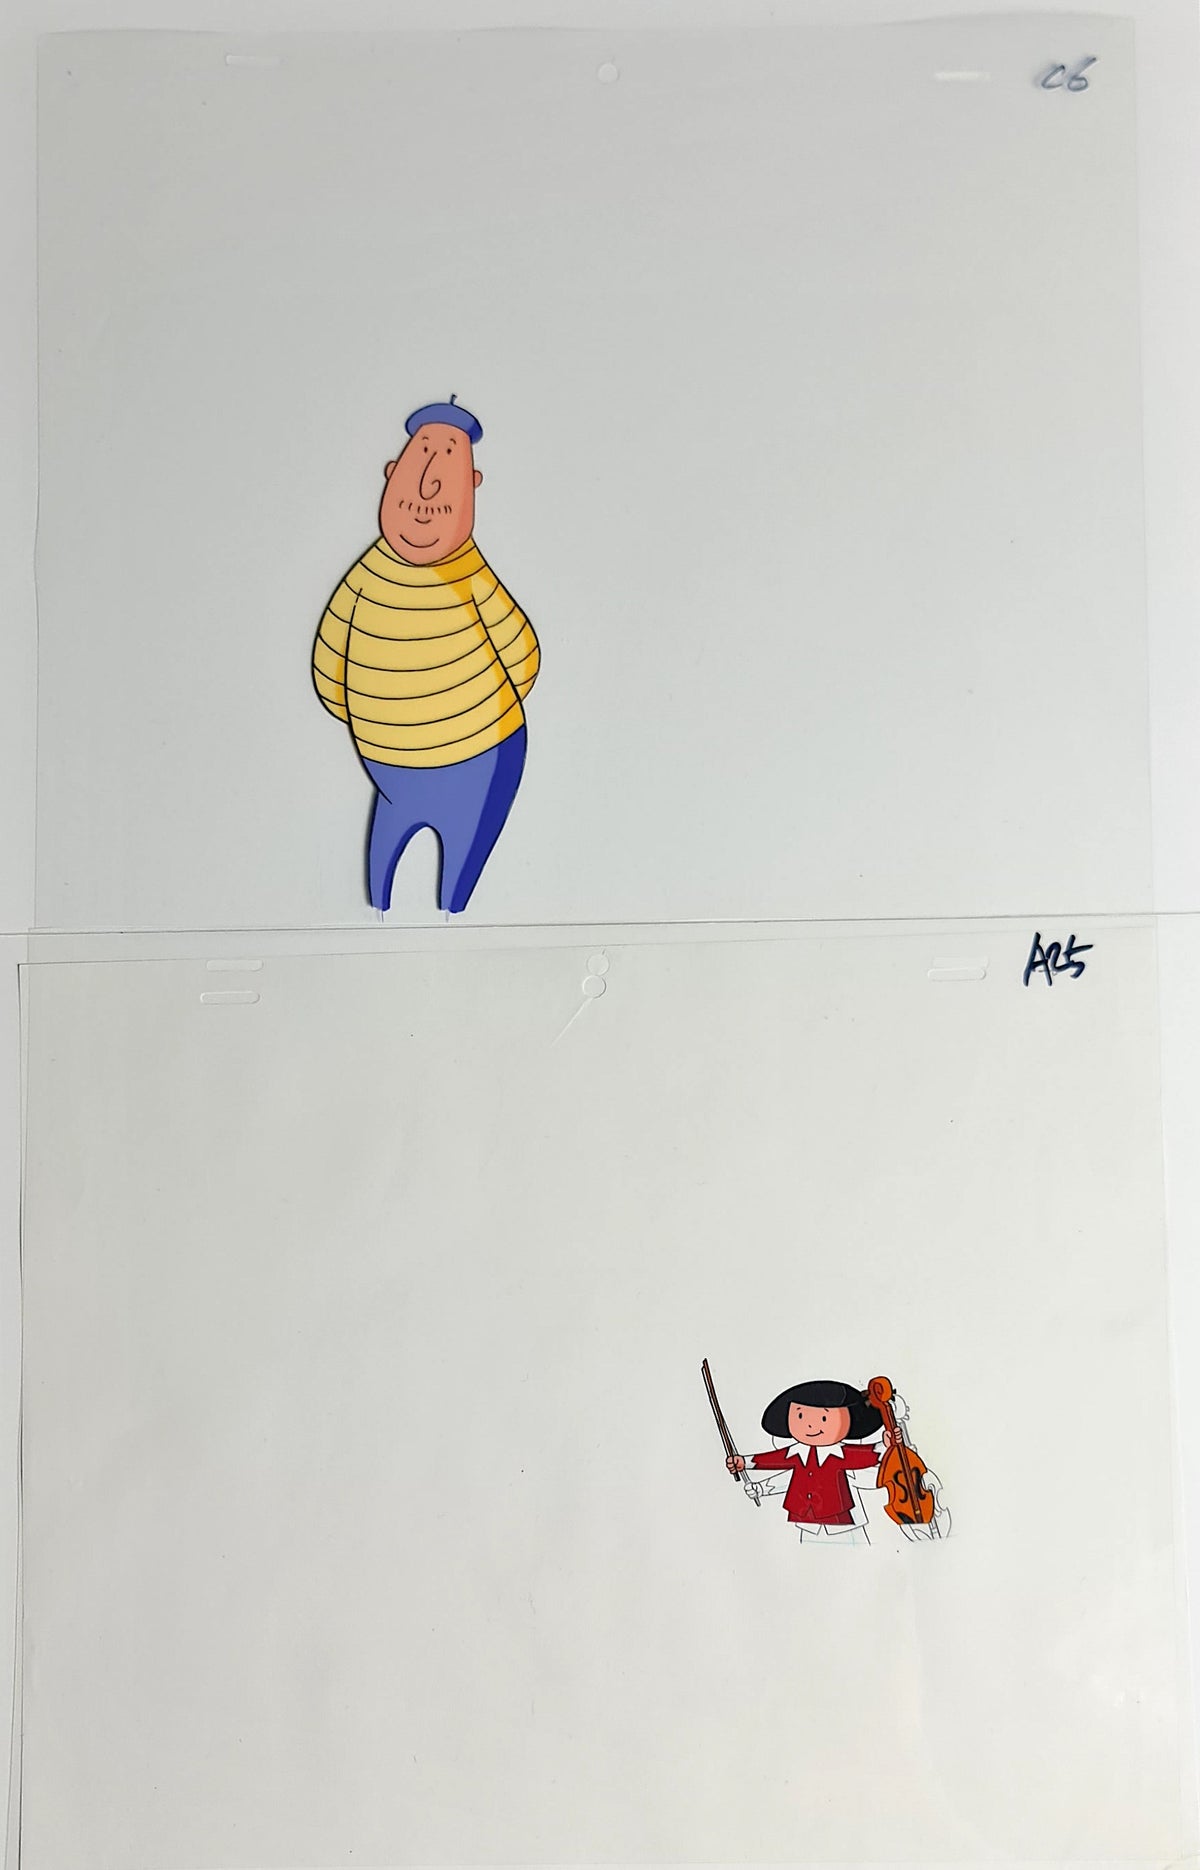 2 Pack Madeline Animation Production Cel: Pepito - 968